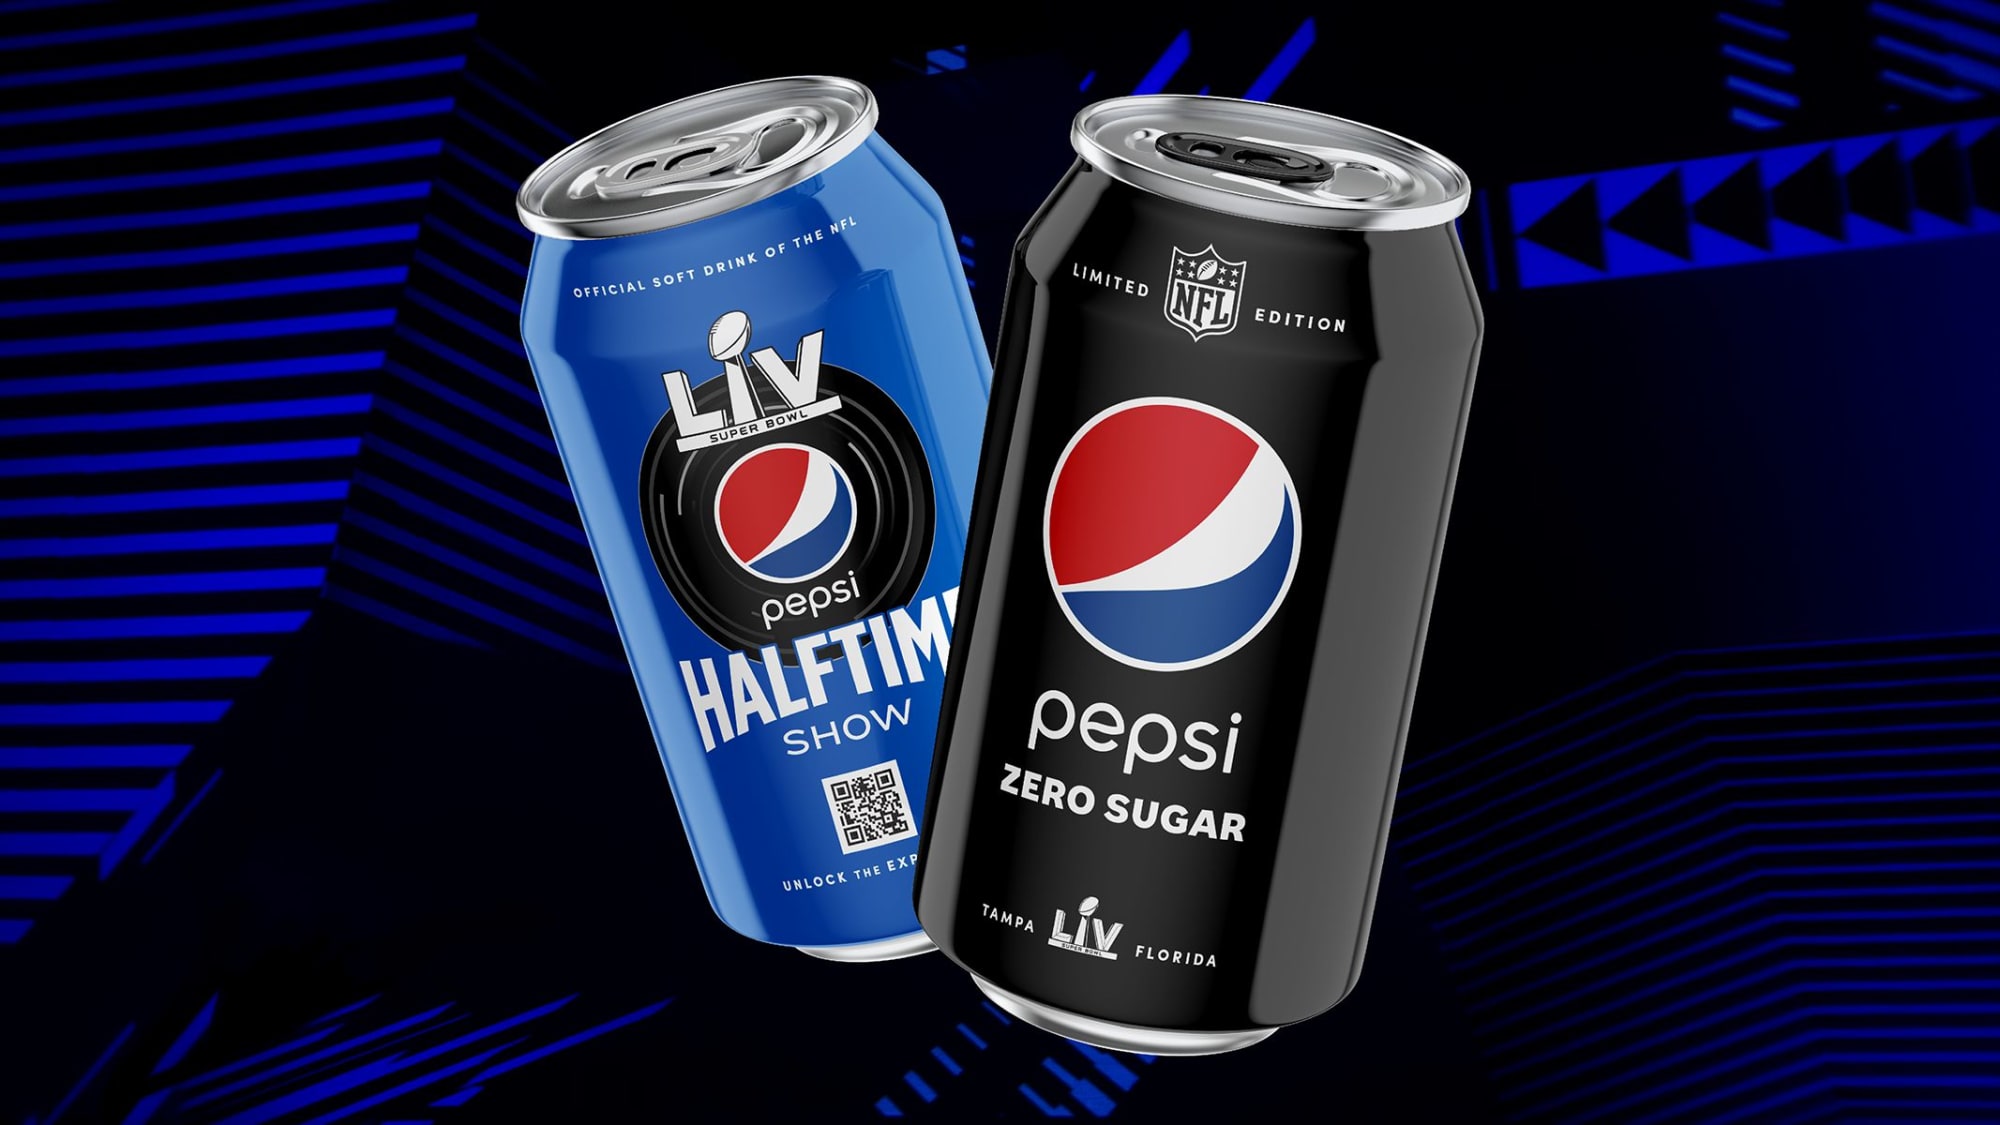 Pepsi and The Weeknd get ready for a new Super Bowl Halftime Show